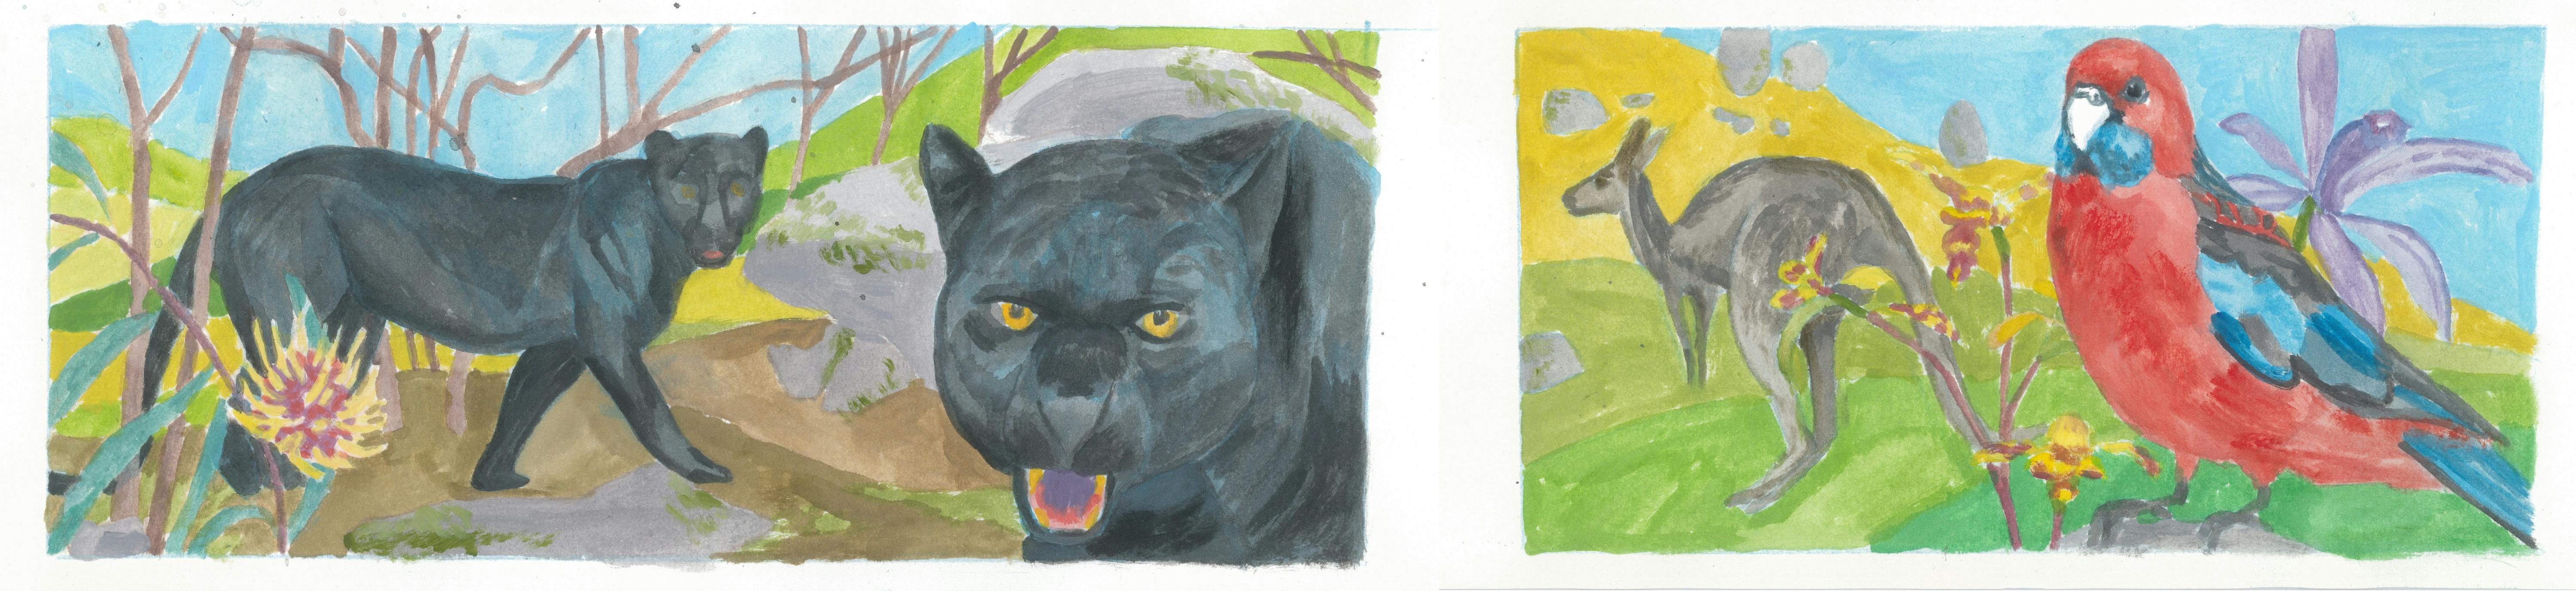 colourful illustrations of two black panthers, a kangaroo, a rosella and fauna